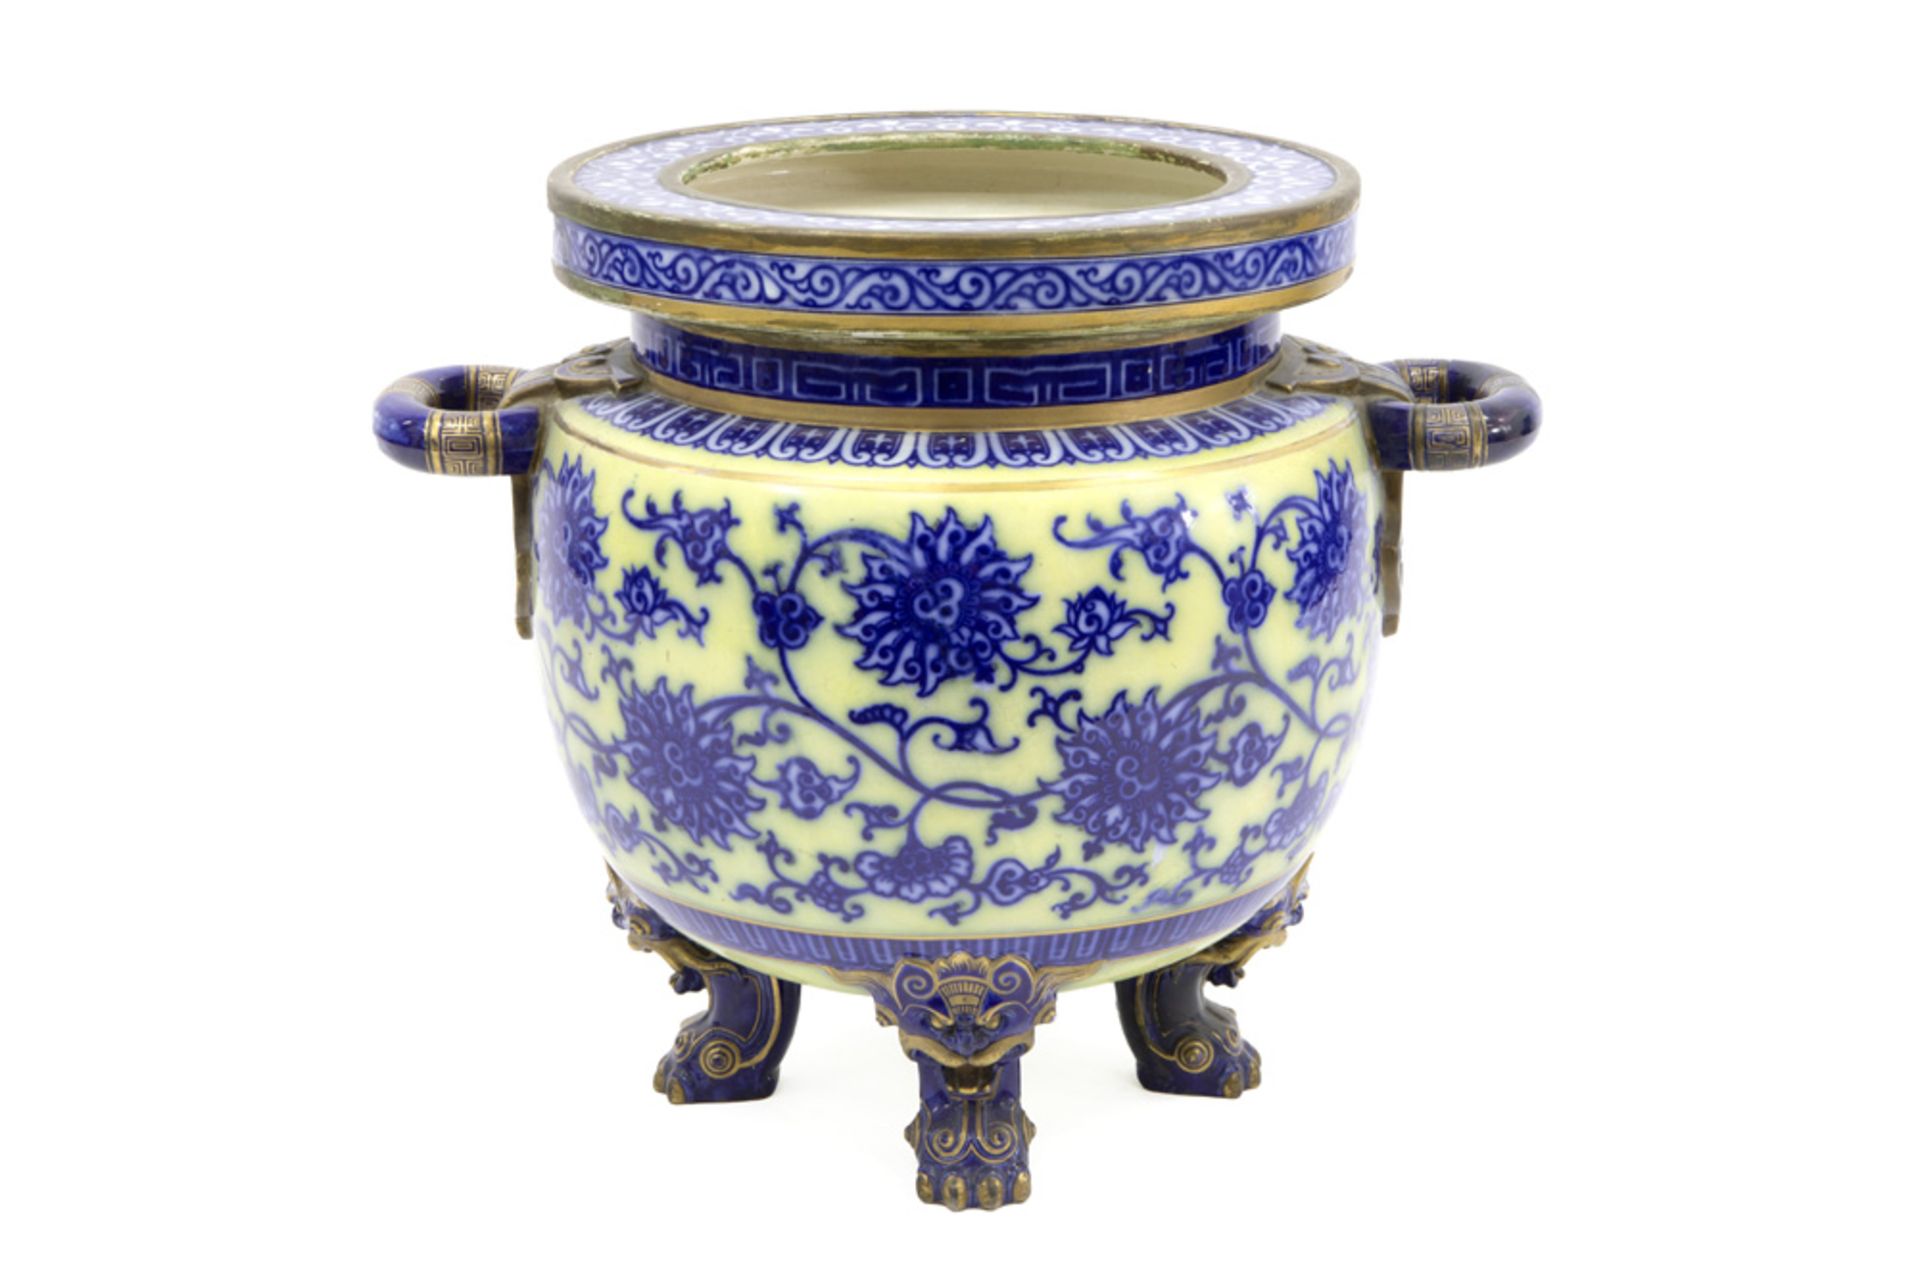 antique Chinese style jardinier in ceramic with a Chinese design and ornamentation ||Antieke